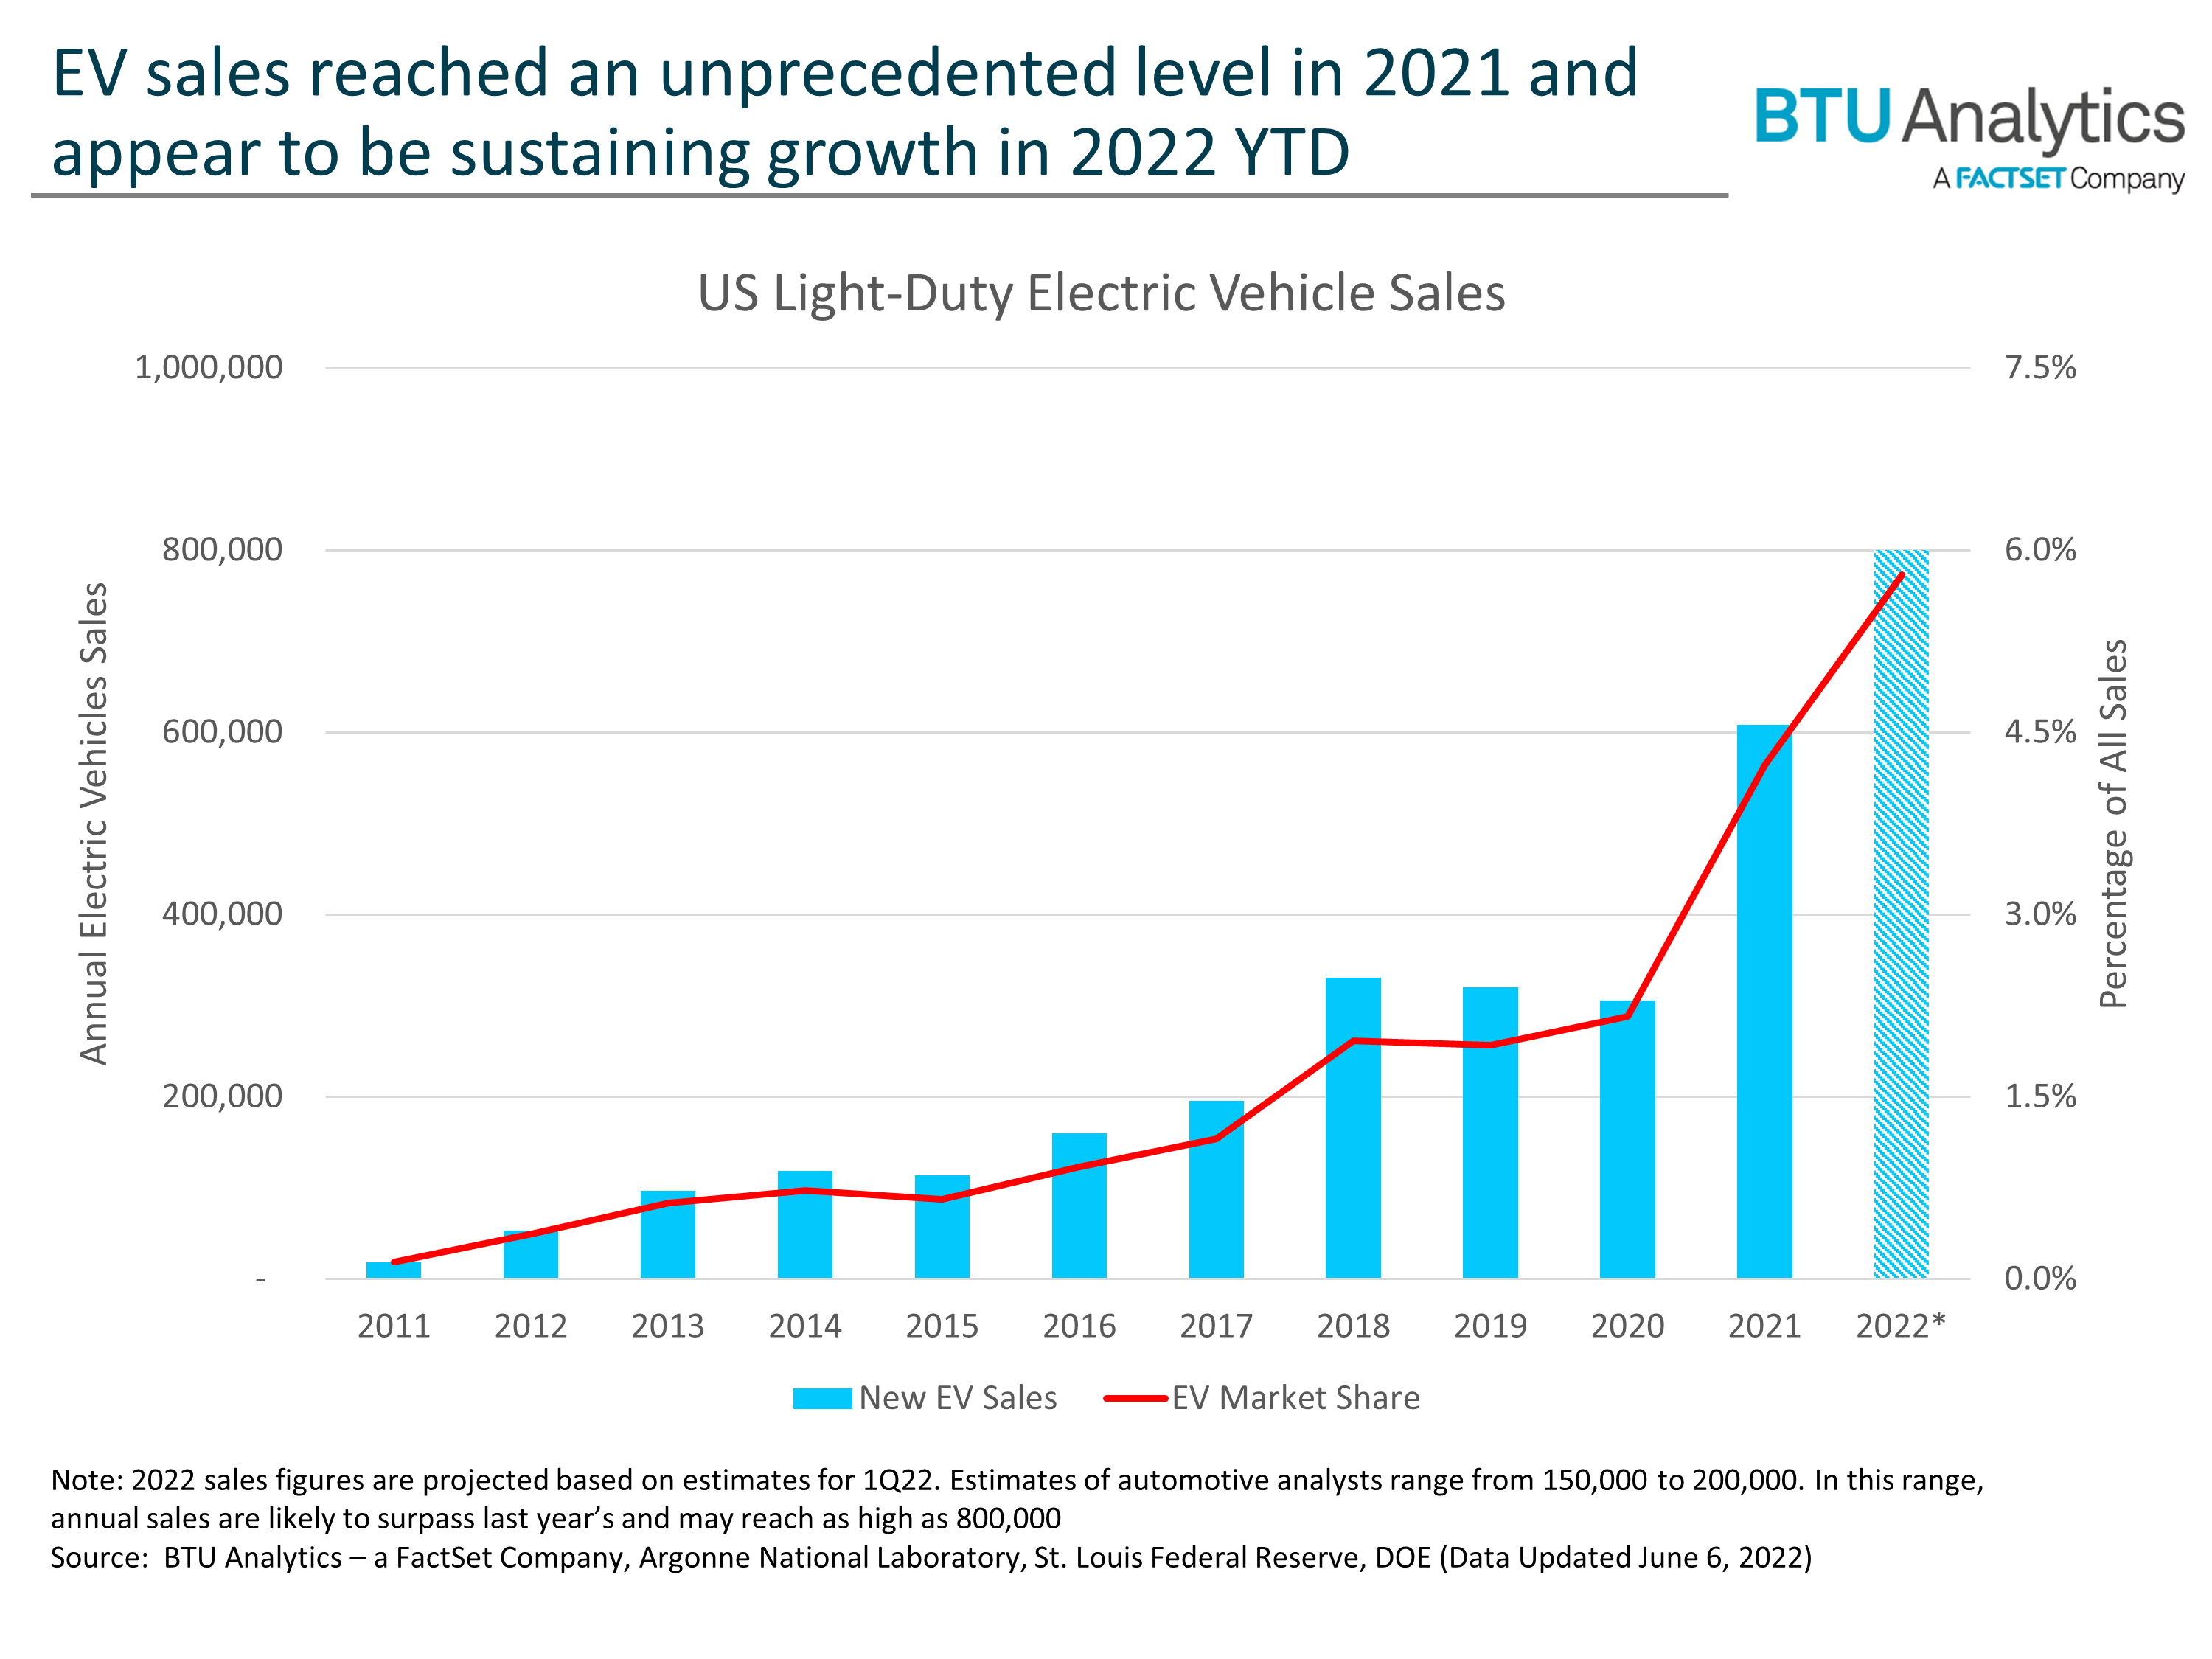 EV sales continue to grow at a strong pace